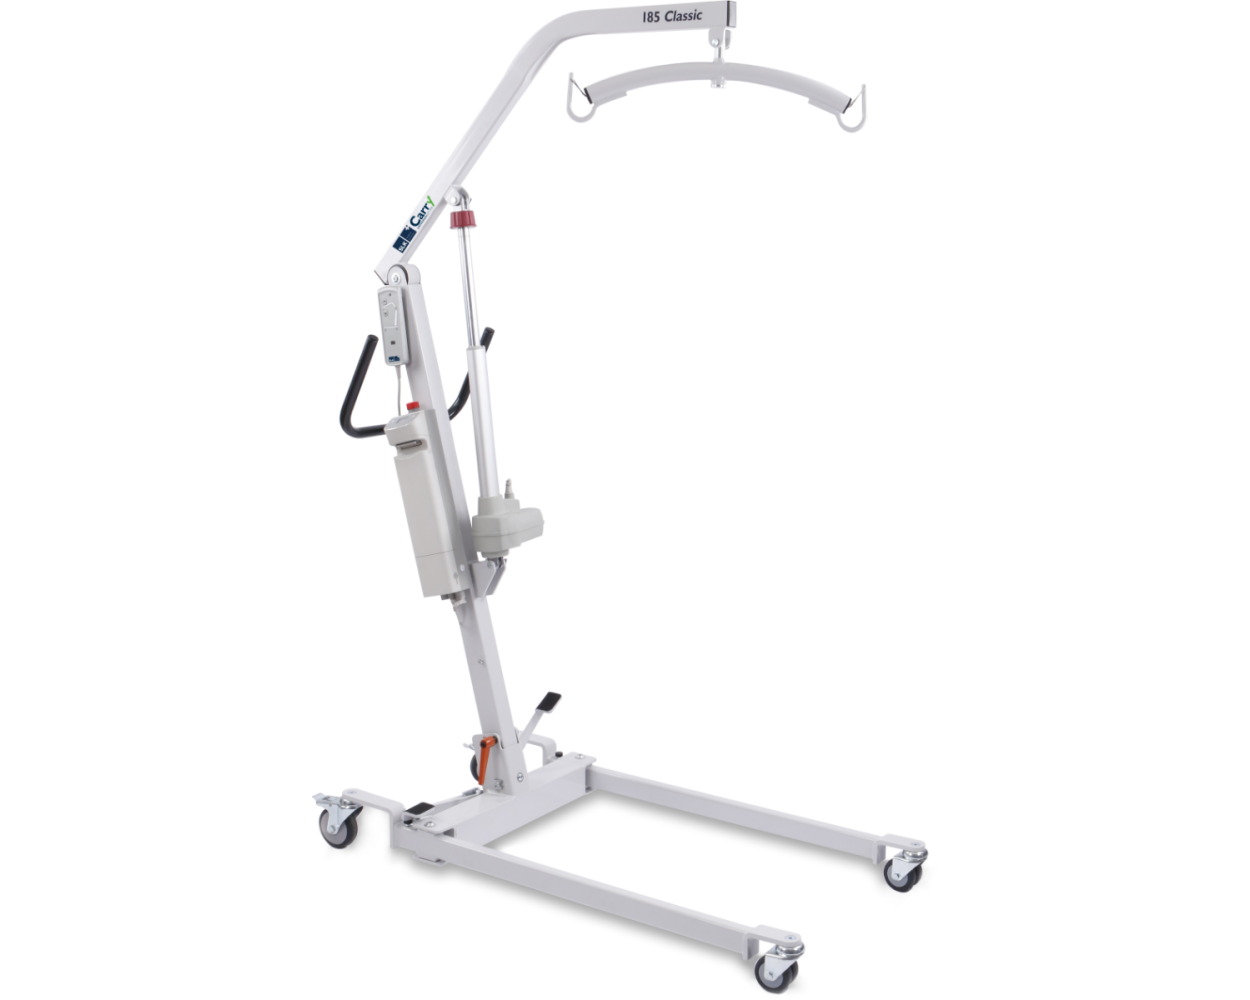 Carry 185 Classic Electric Spreading Legs